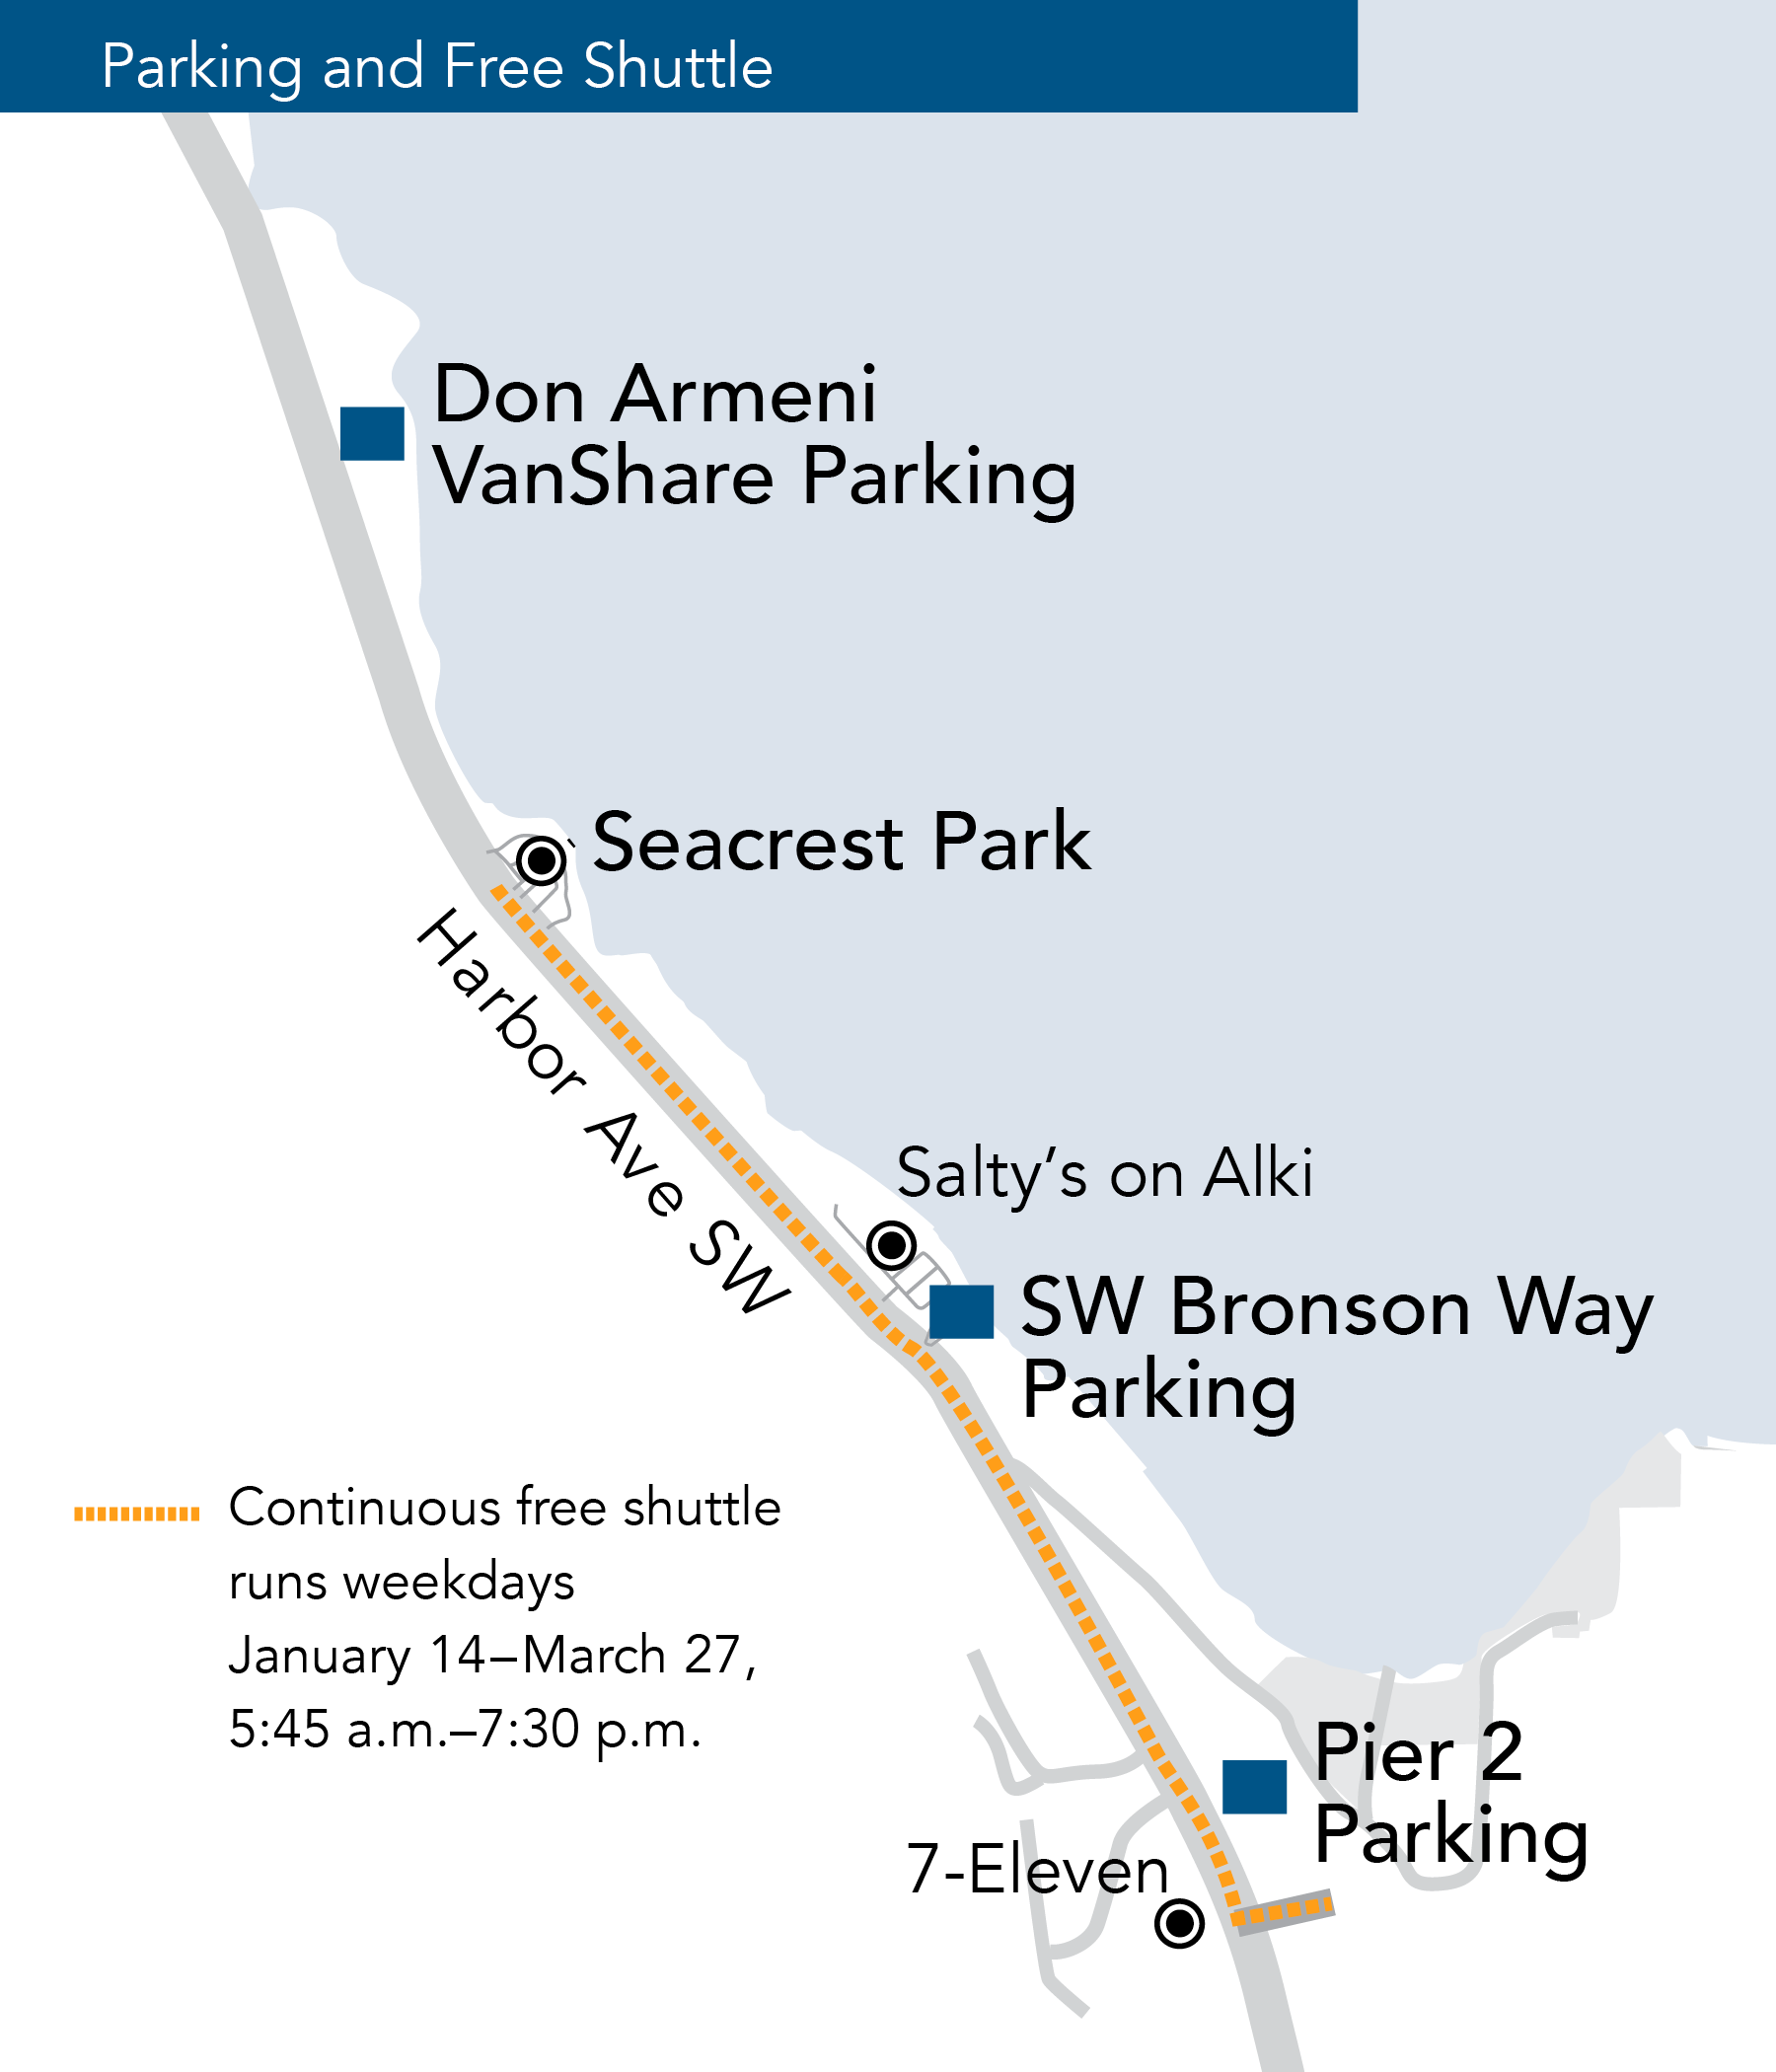 A map showing the Ride2 parking and shuttle zones.